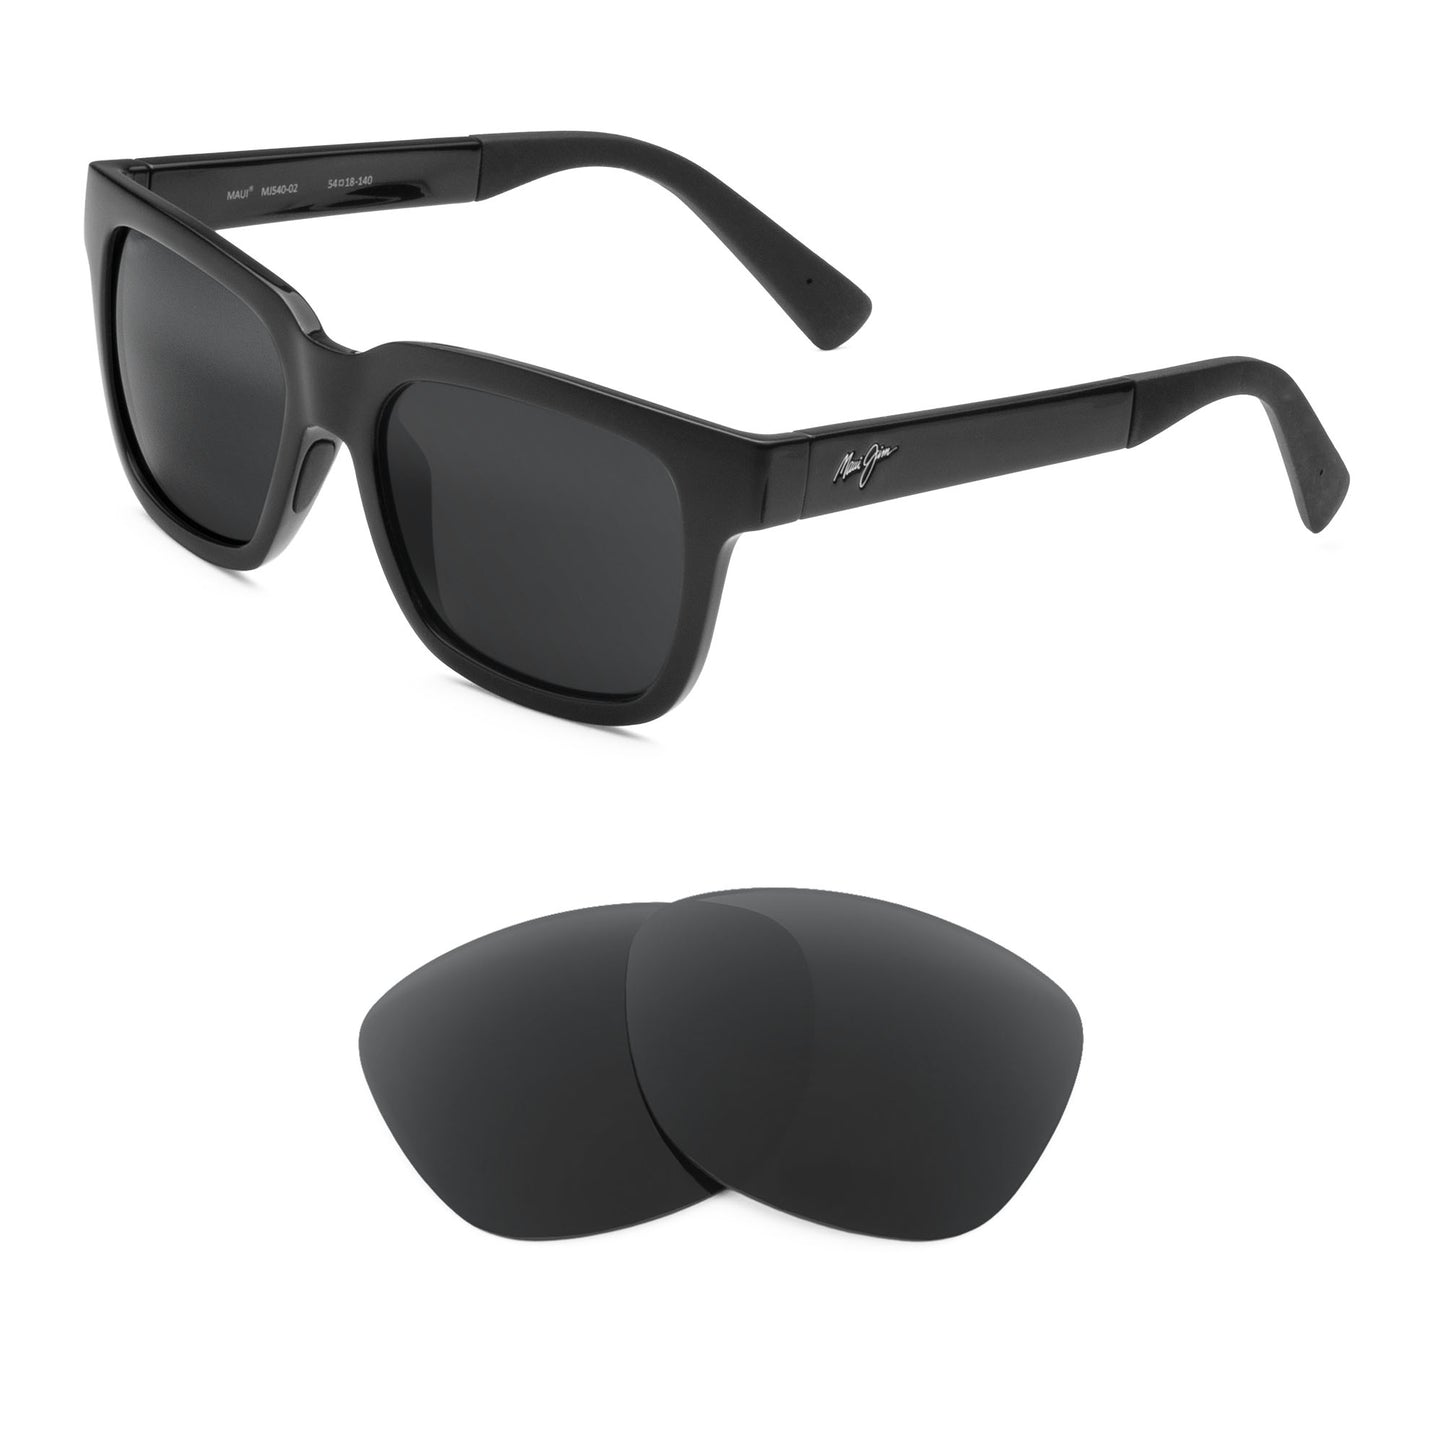 Maui Jim Mongoose MJ540 sunglasses with replacement lenses